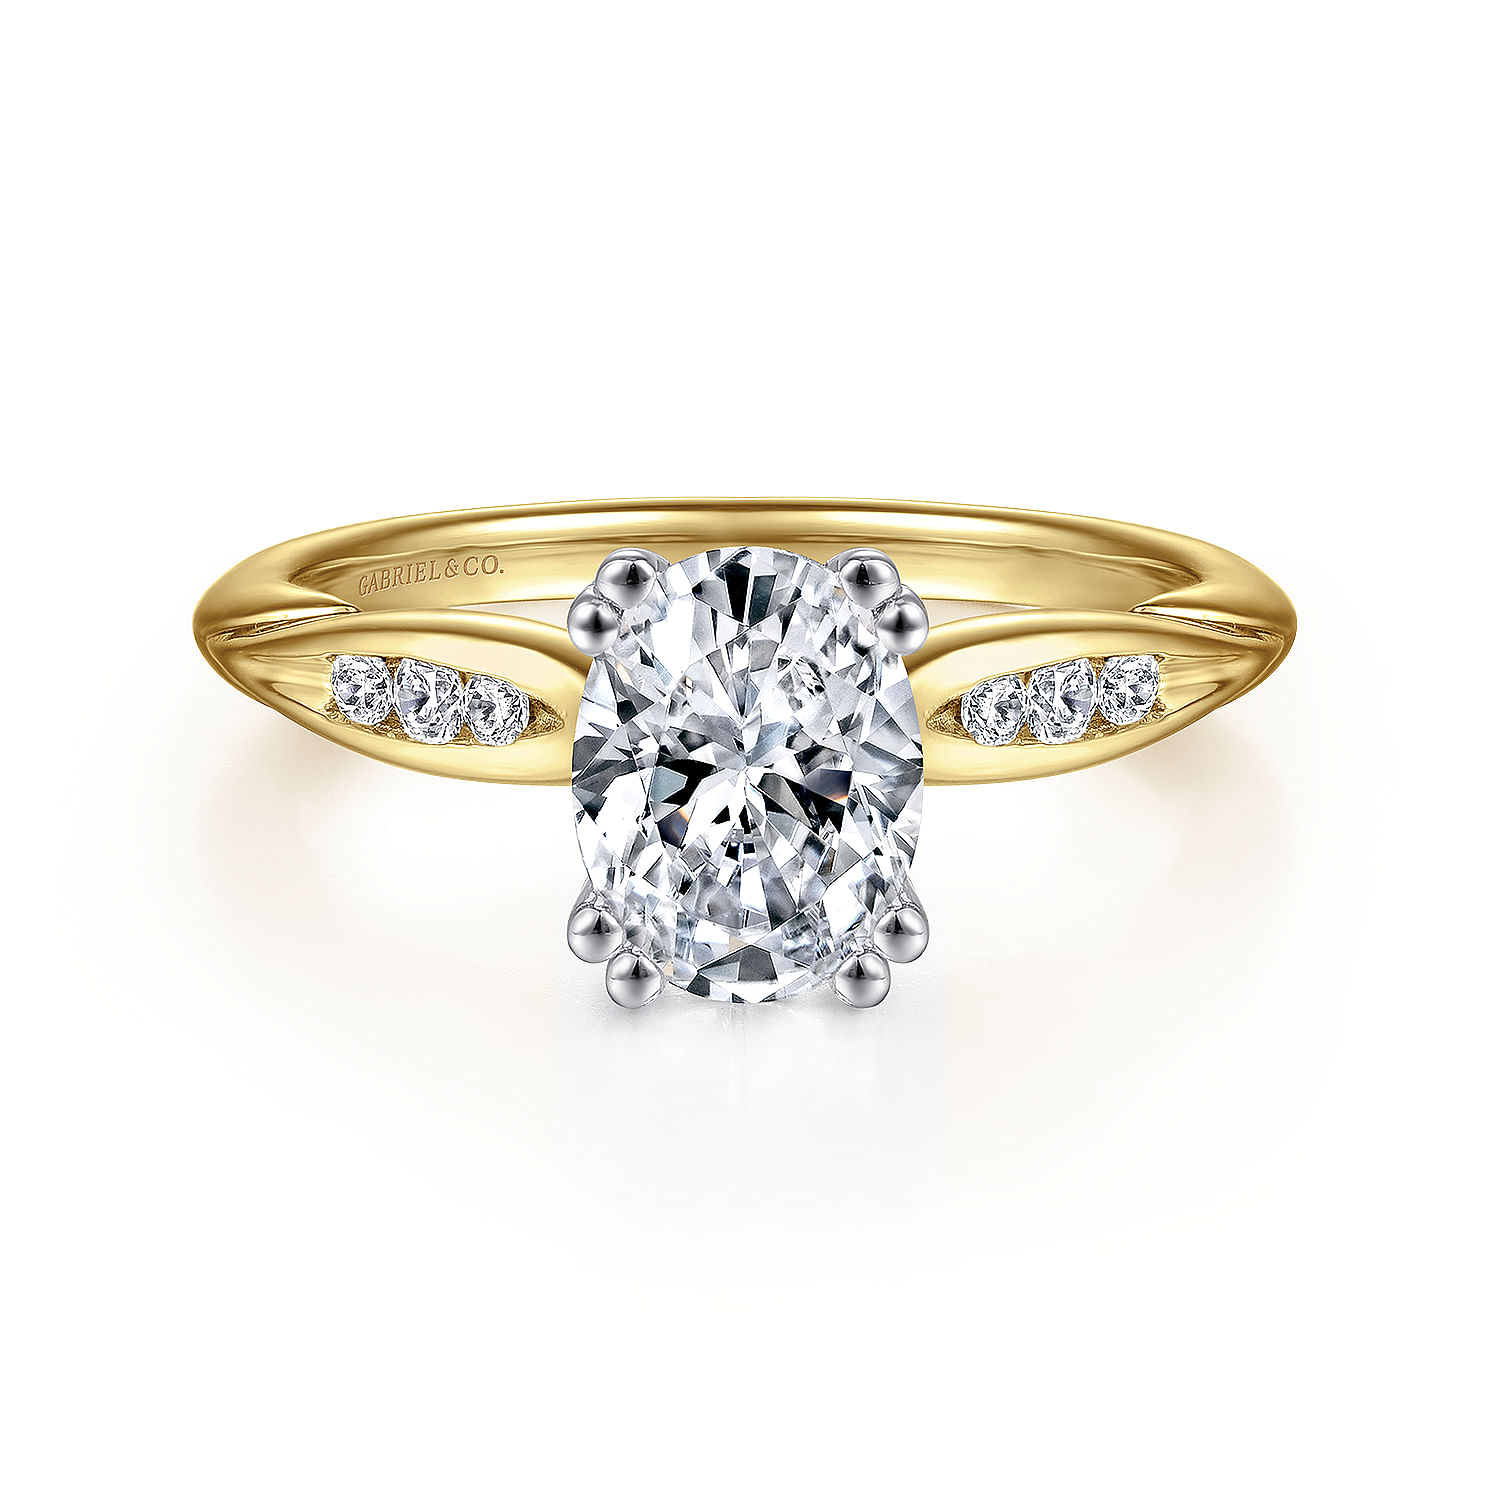 Quinn - 14K White-Yellow Gold Oval Diamond Channel Set Engagement Ring